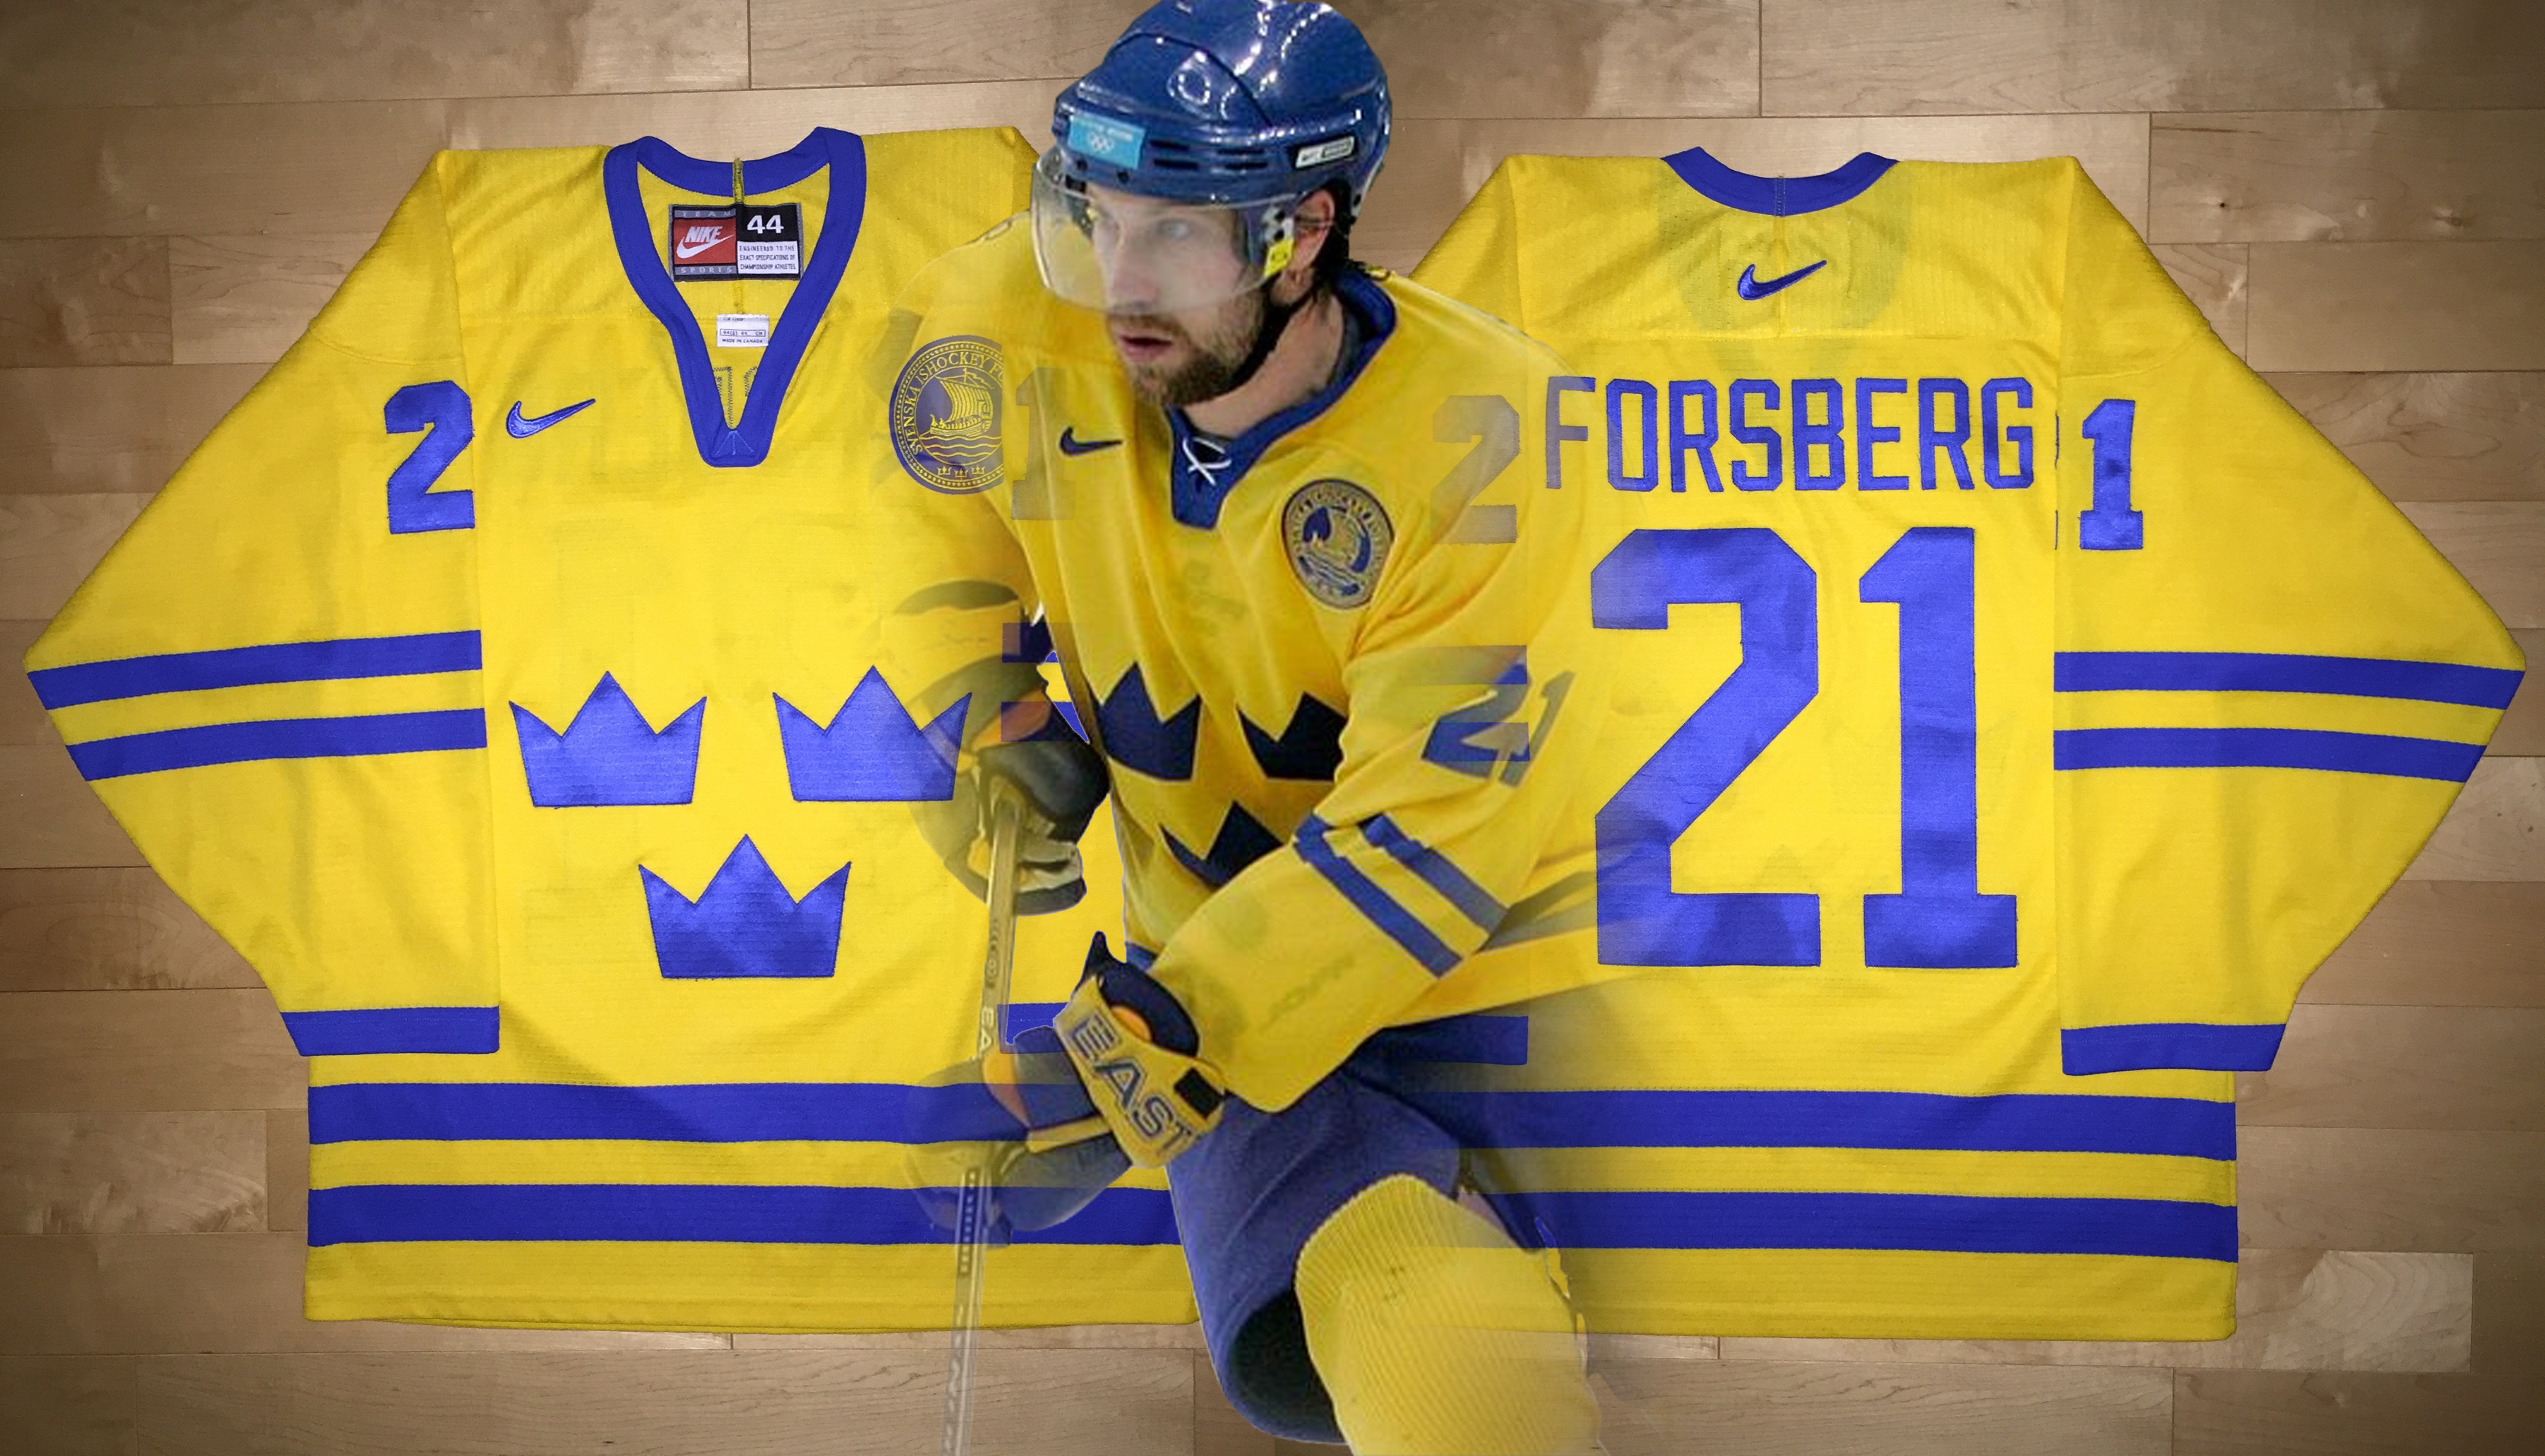 peter forsberg jersey for sale